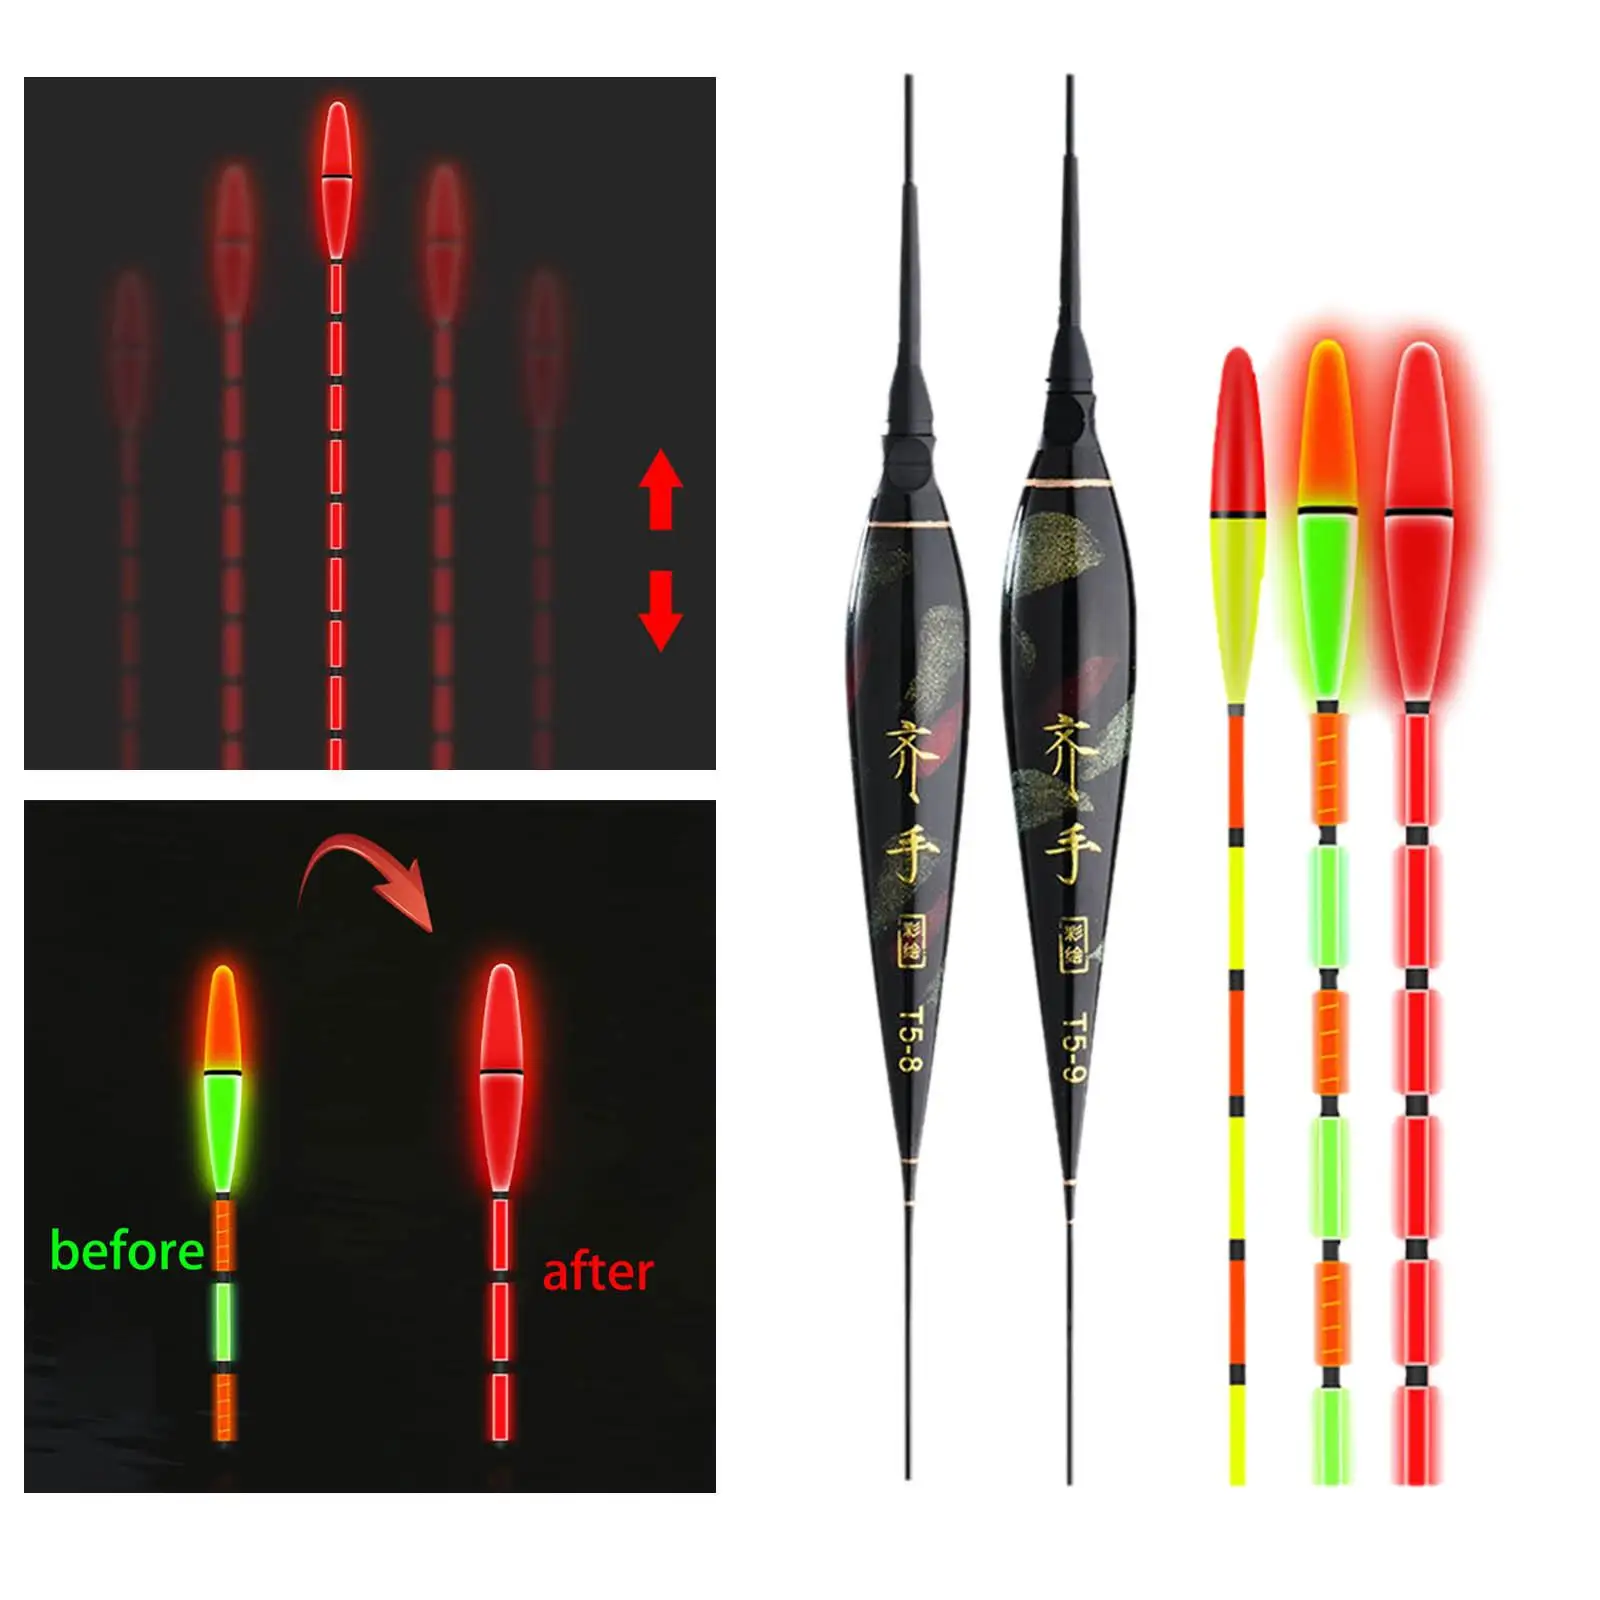 5 Pieces  Electric Fishing Float  Light Electronic Buoy Tackle